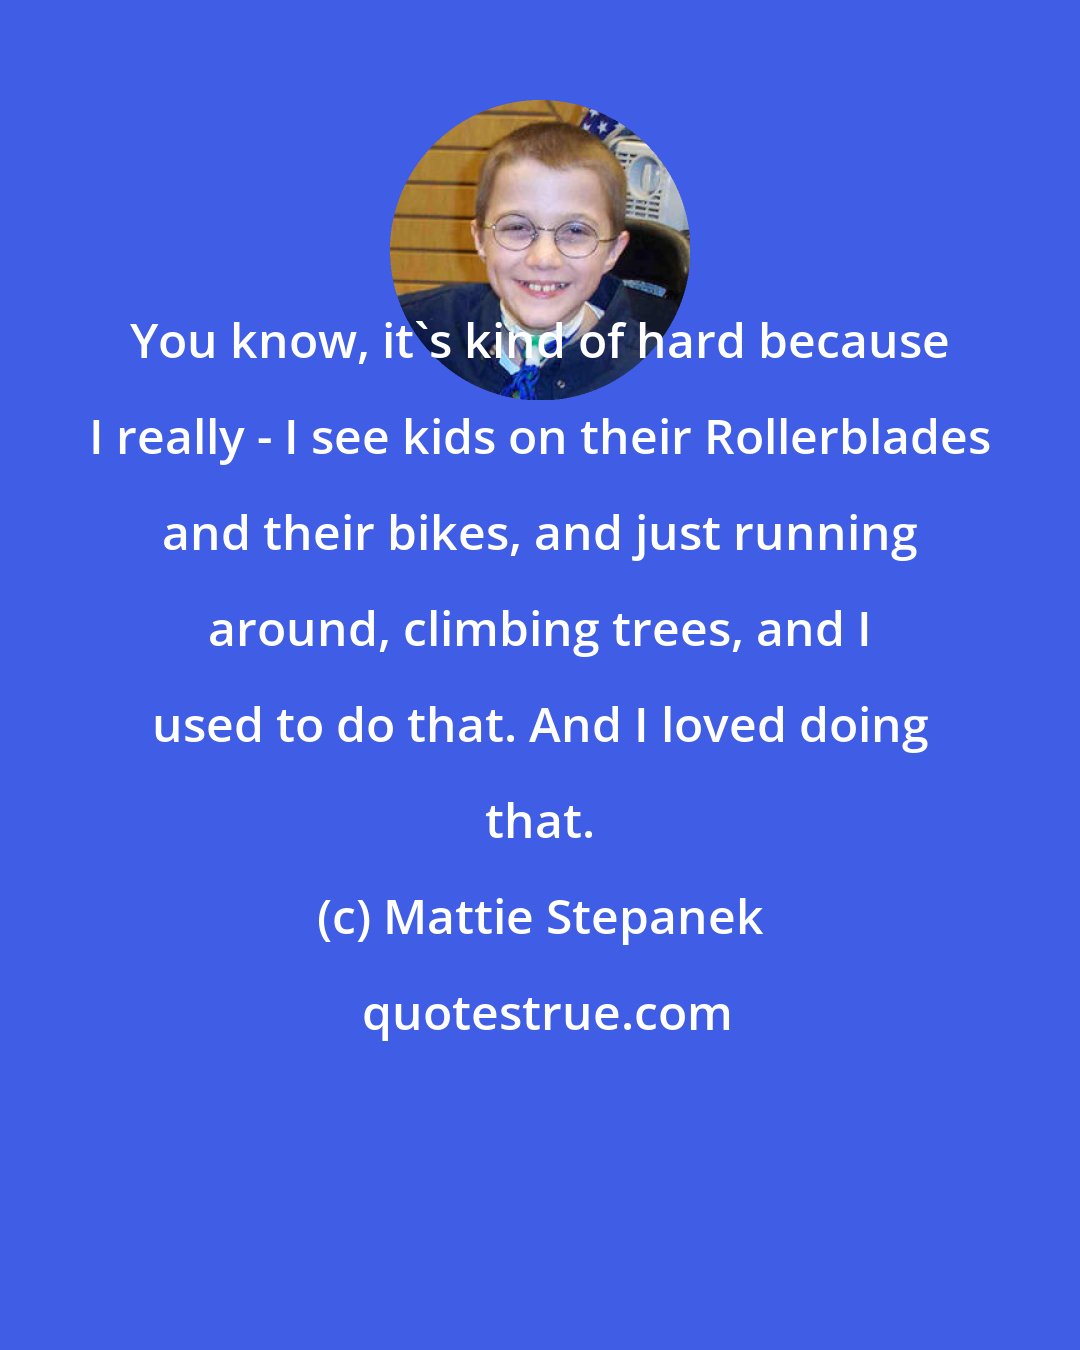 Mattie Stepanek: You know, it's kind of hard because I really - I see kids on their Rollerblades and their bikes, and just running around, climbing trees, and I used to do that. And I loved doing that.